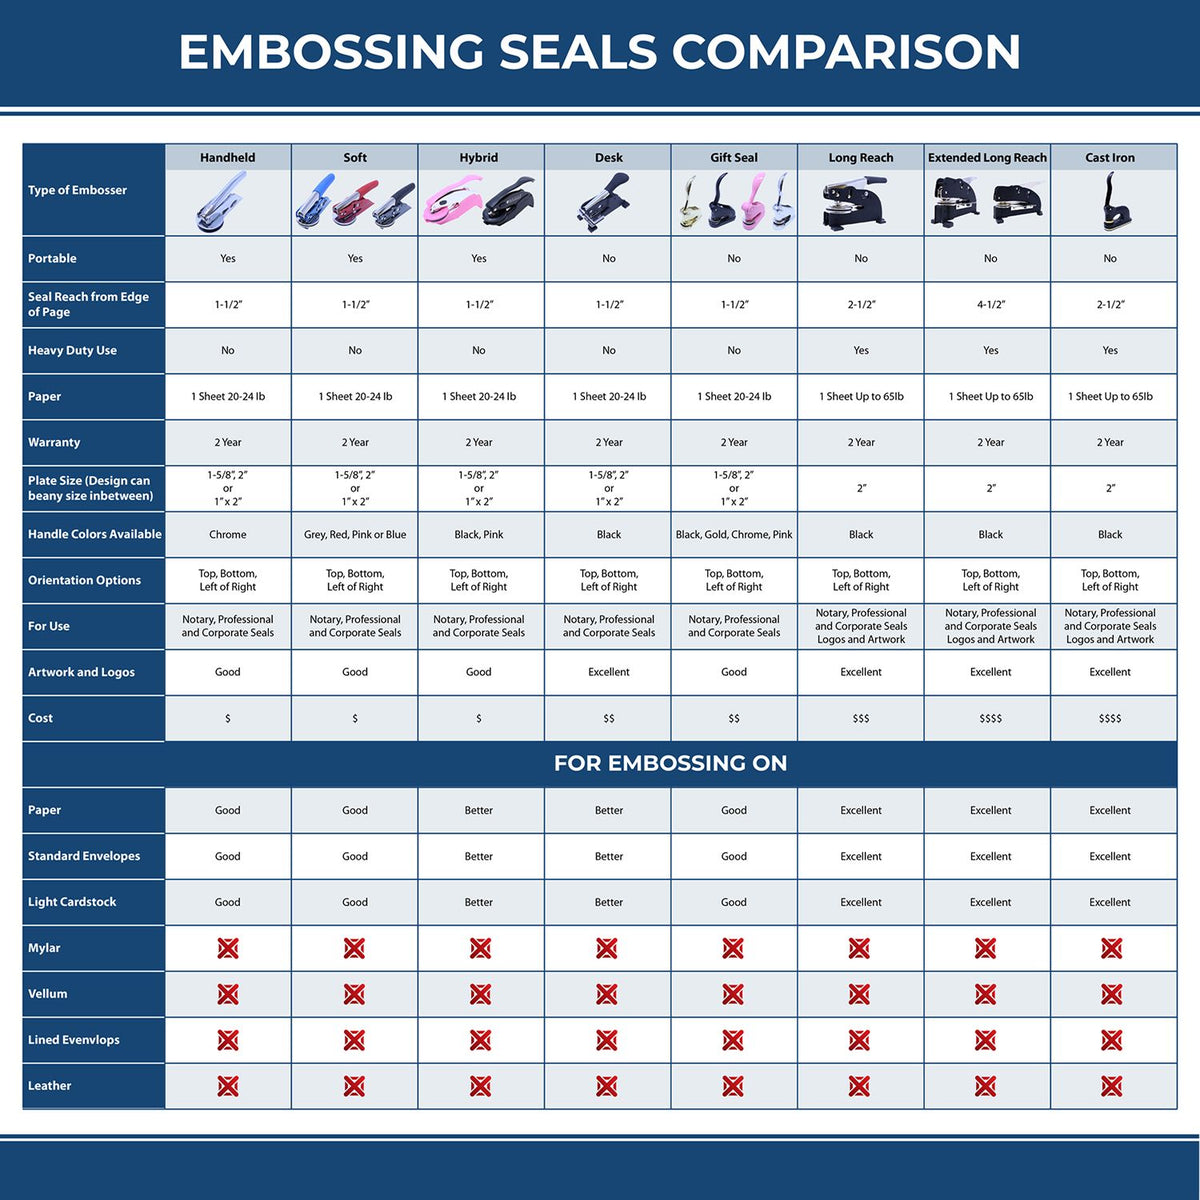 A comparison chart for the different types of mount models available for the Hybrid Hawaii Architect Seal